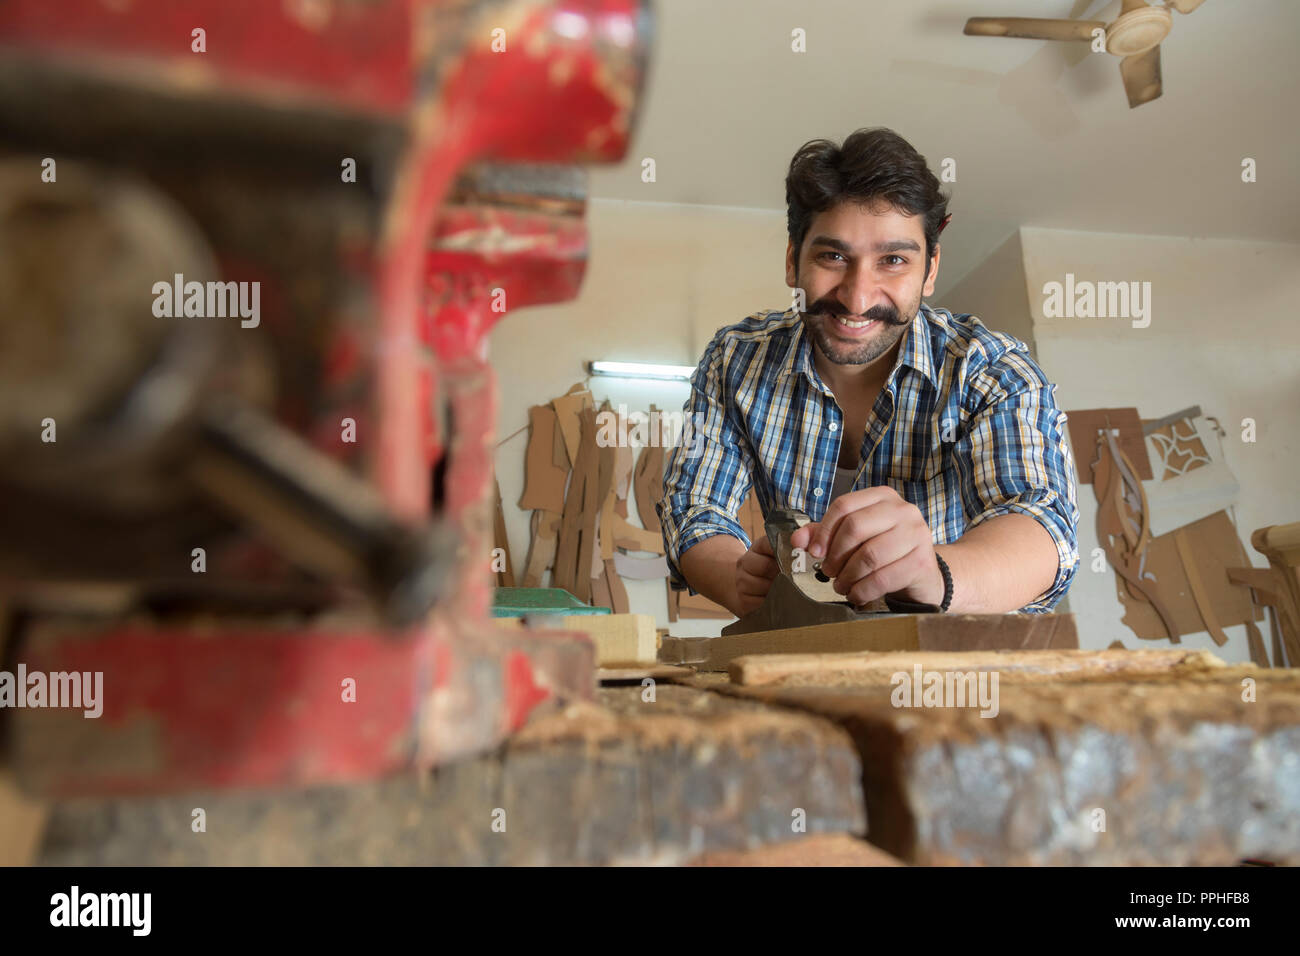 Smiling carpenter using a scraper blade to smoothen wooden log with a metal clamp in the foreground. Stock Photo